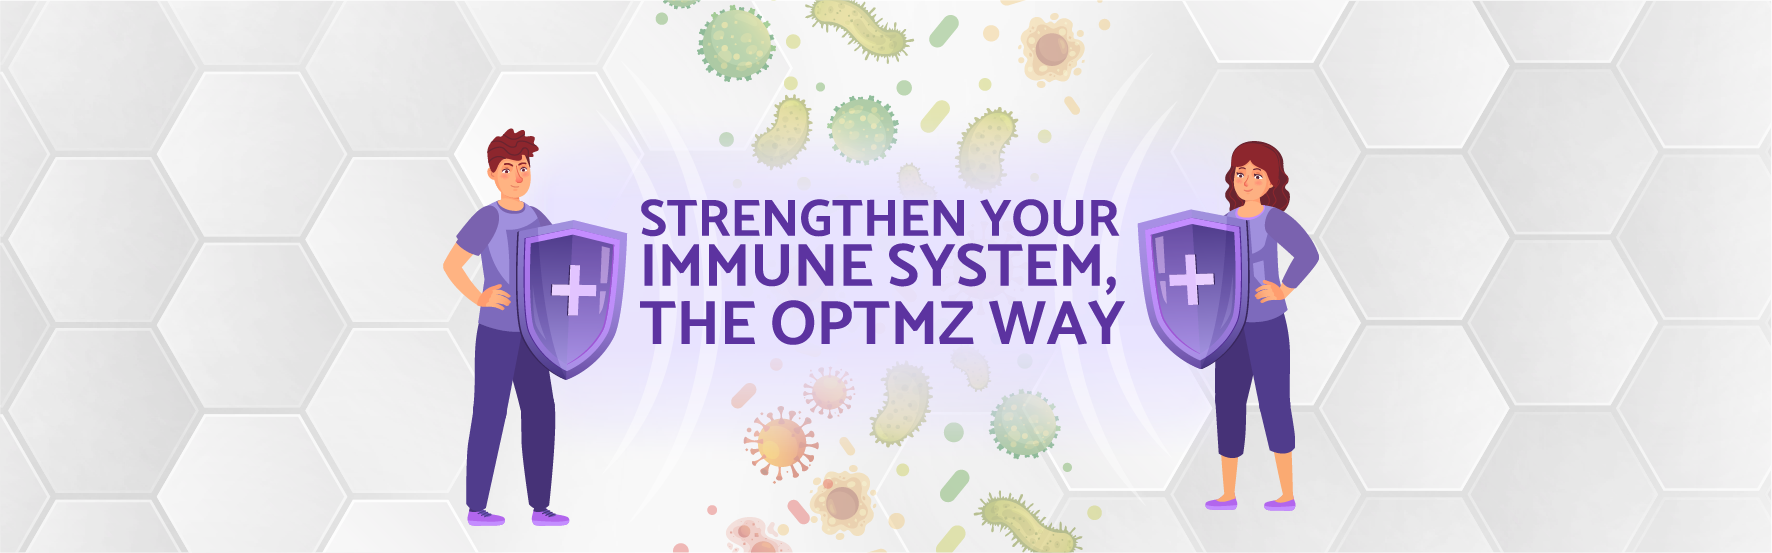 Strengthen Your Immune System, The OPTMZ Way! | Articles | OPTMZ | 